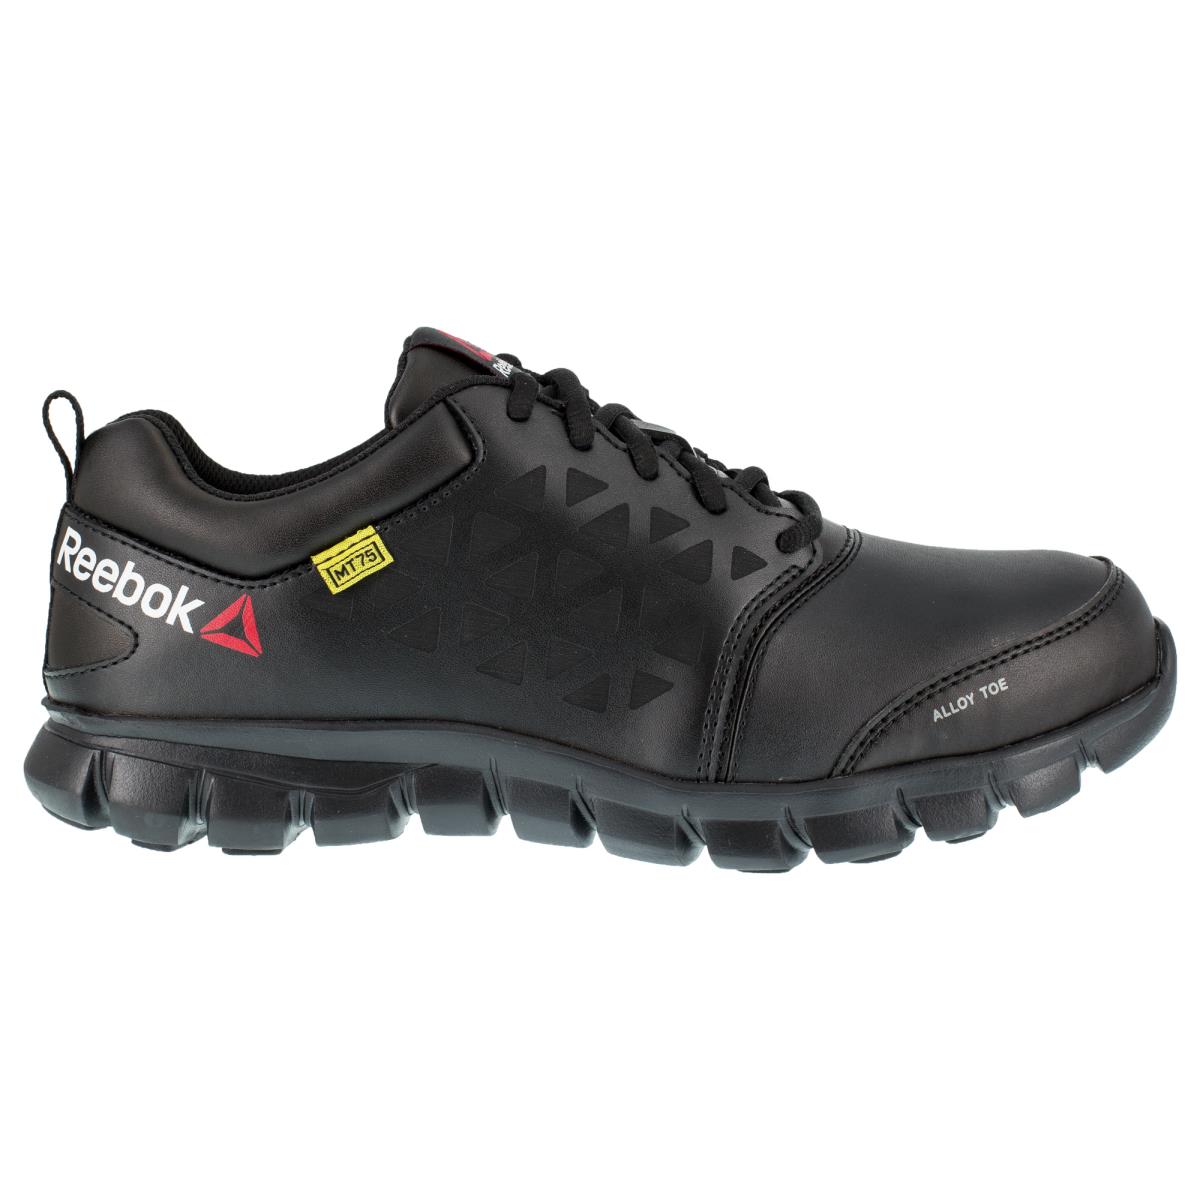 Reebok Womens Black Leather Oxfords Sublite Cushion Work AT M